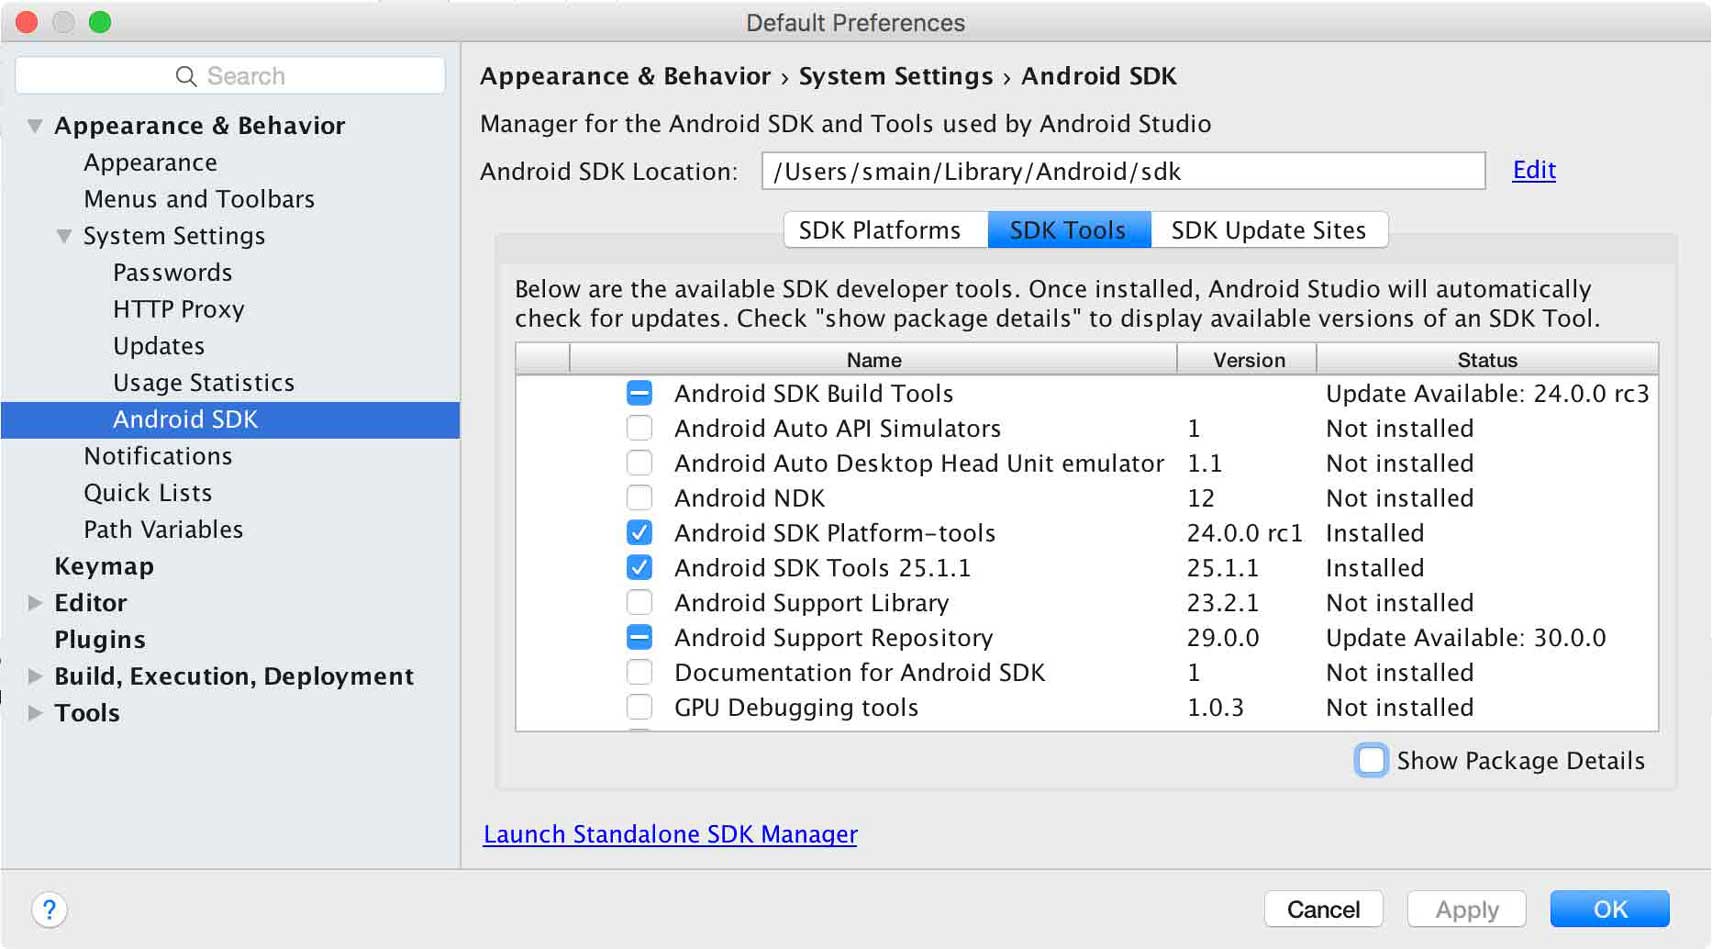 android emulator for mac 10.11.6